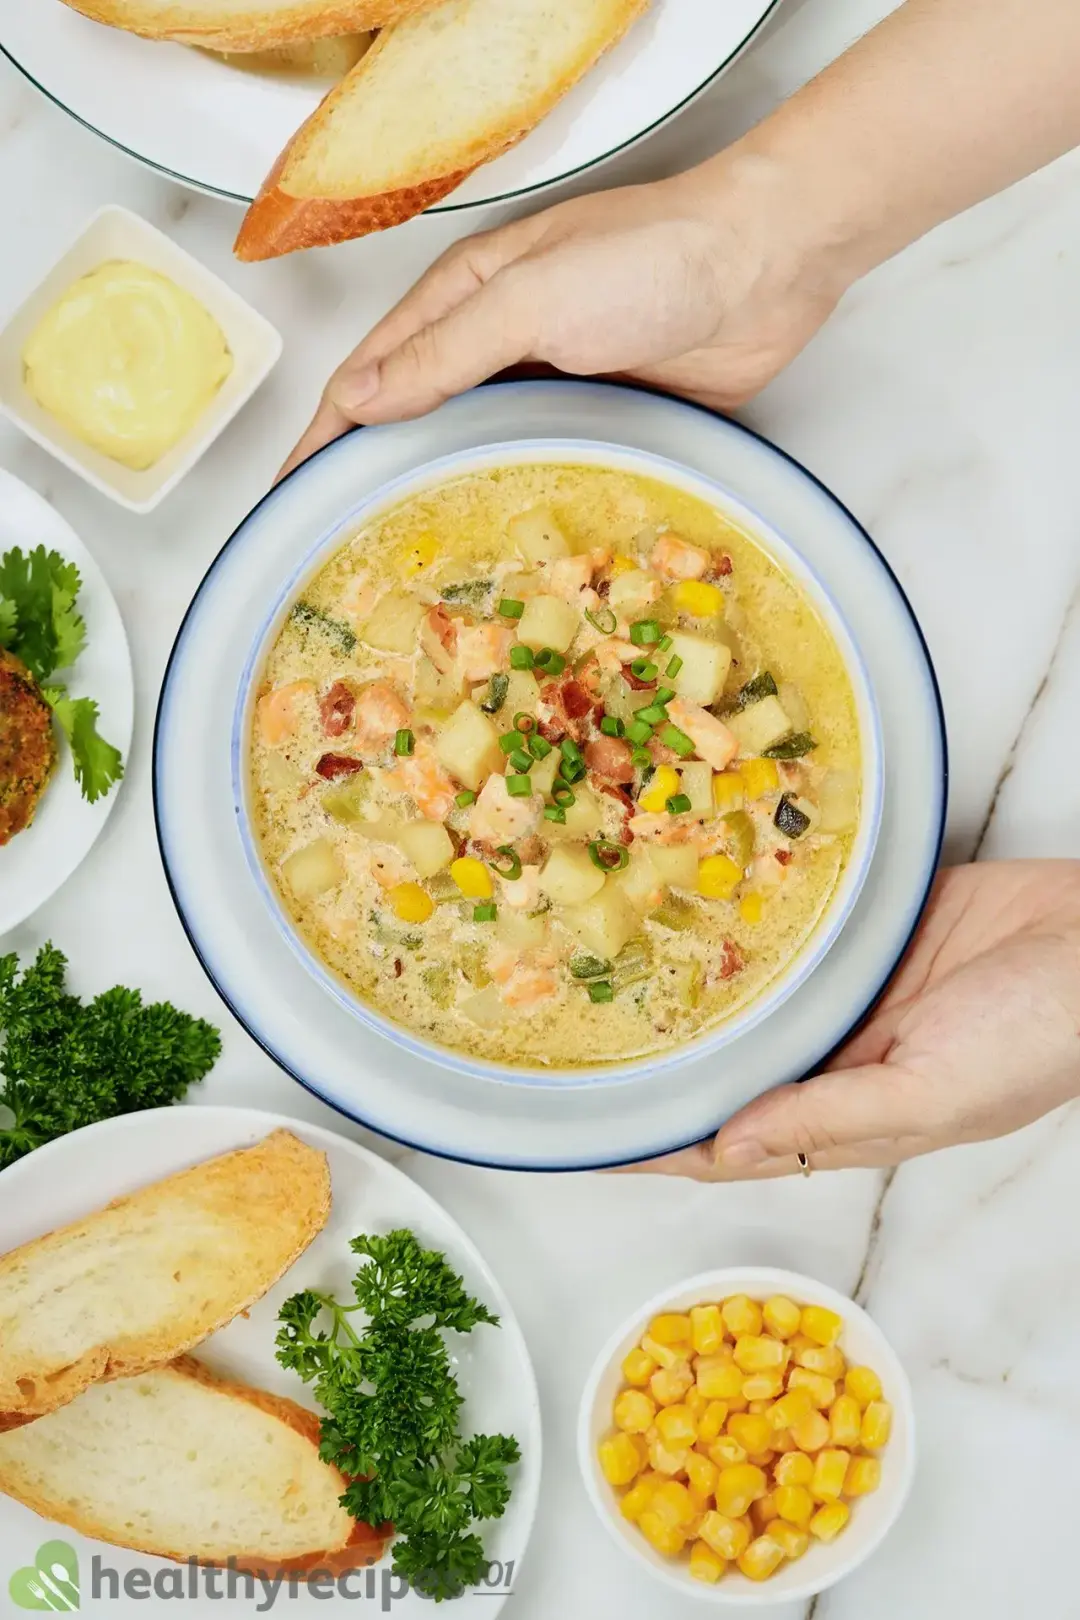 A large bowl of salmon chowder surrounded with some air-fried baguette slices and canned corn